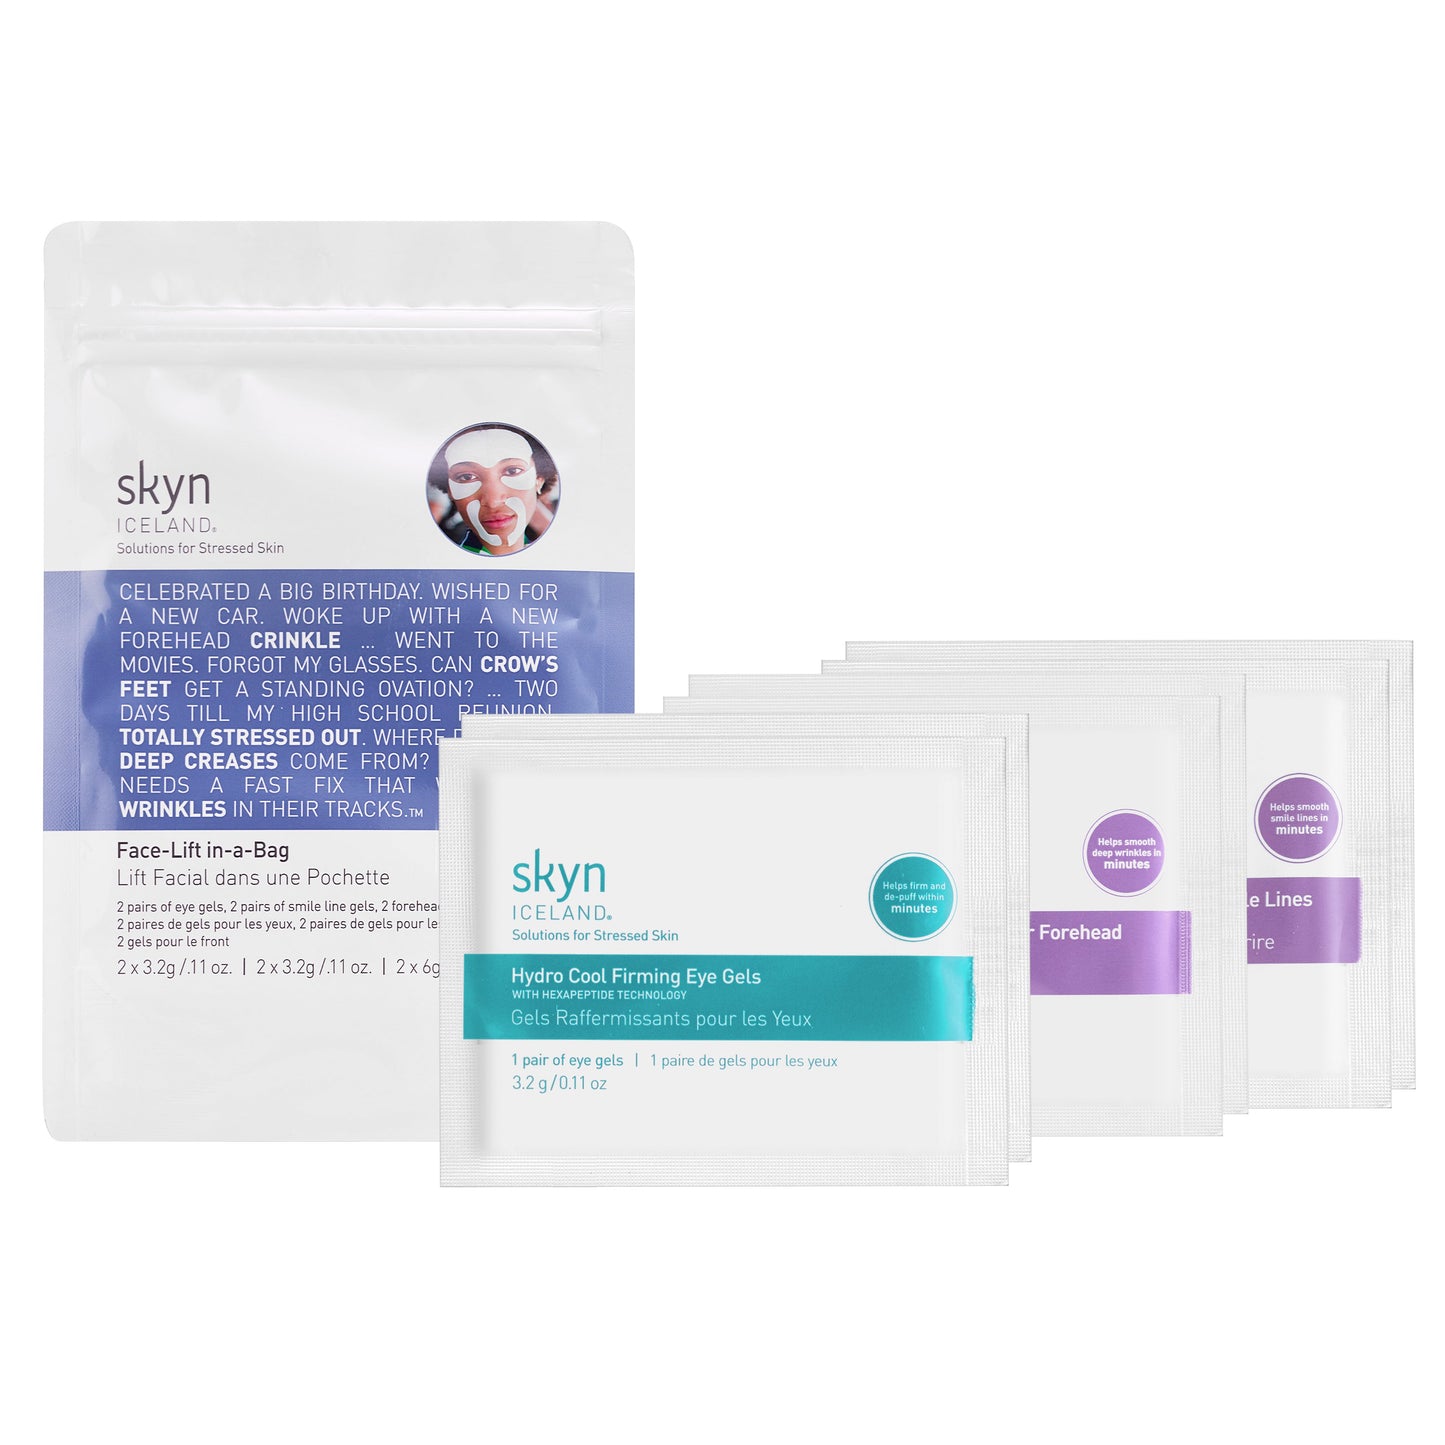 Hydro Cool Firming Face-Lift in-a-Bag (6-piece kit) by Skyn Iceland